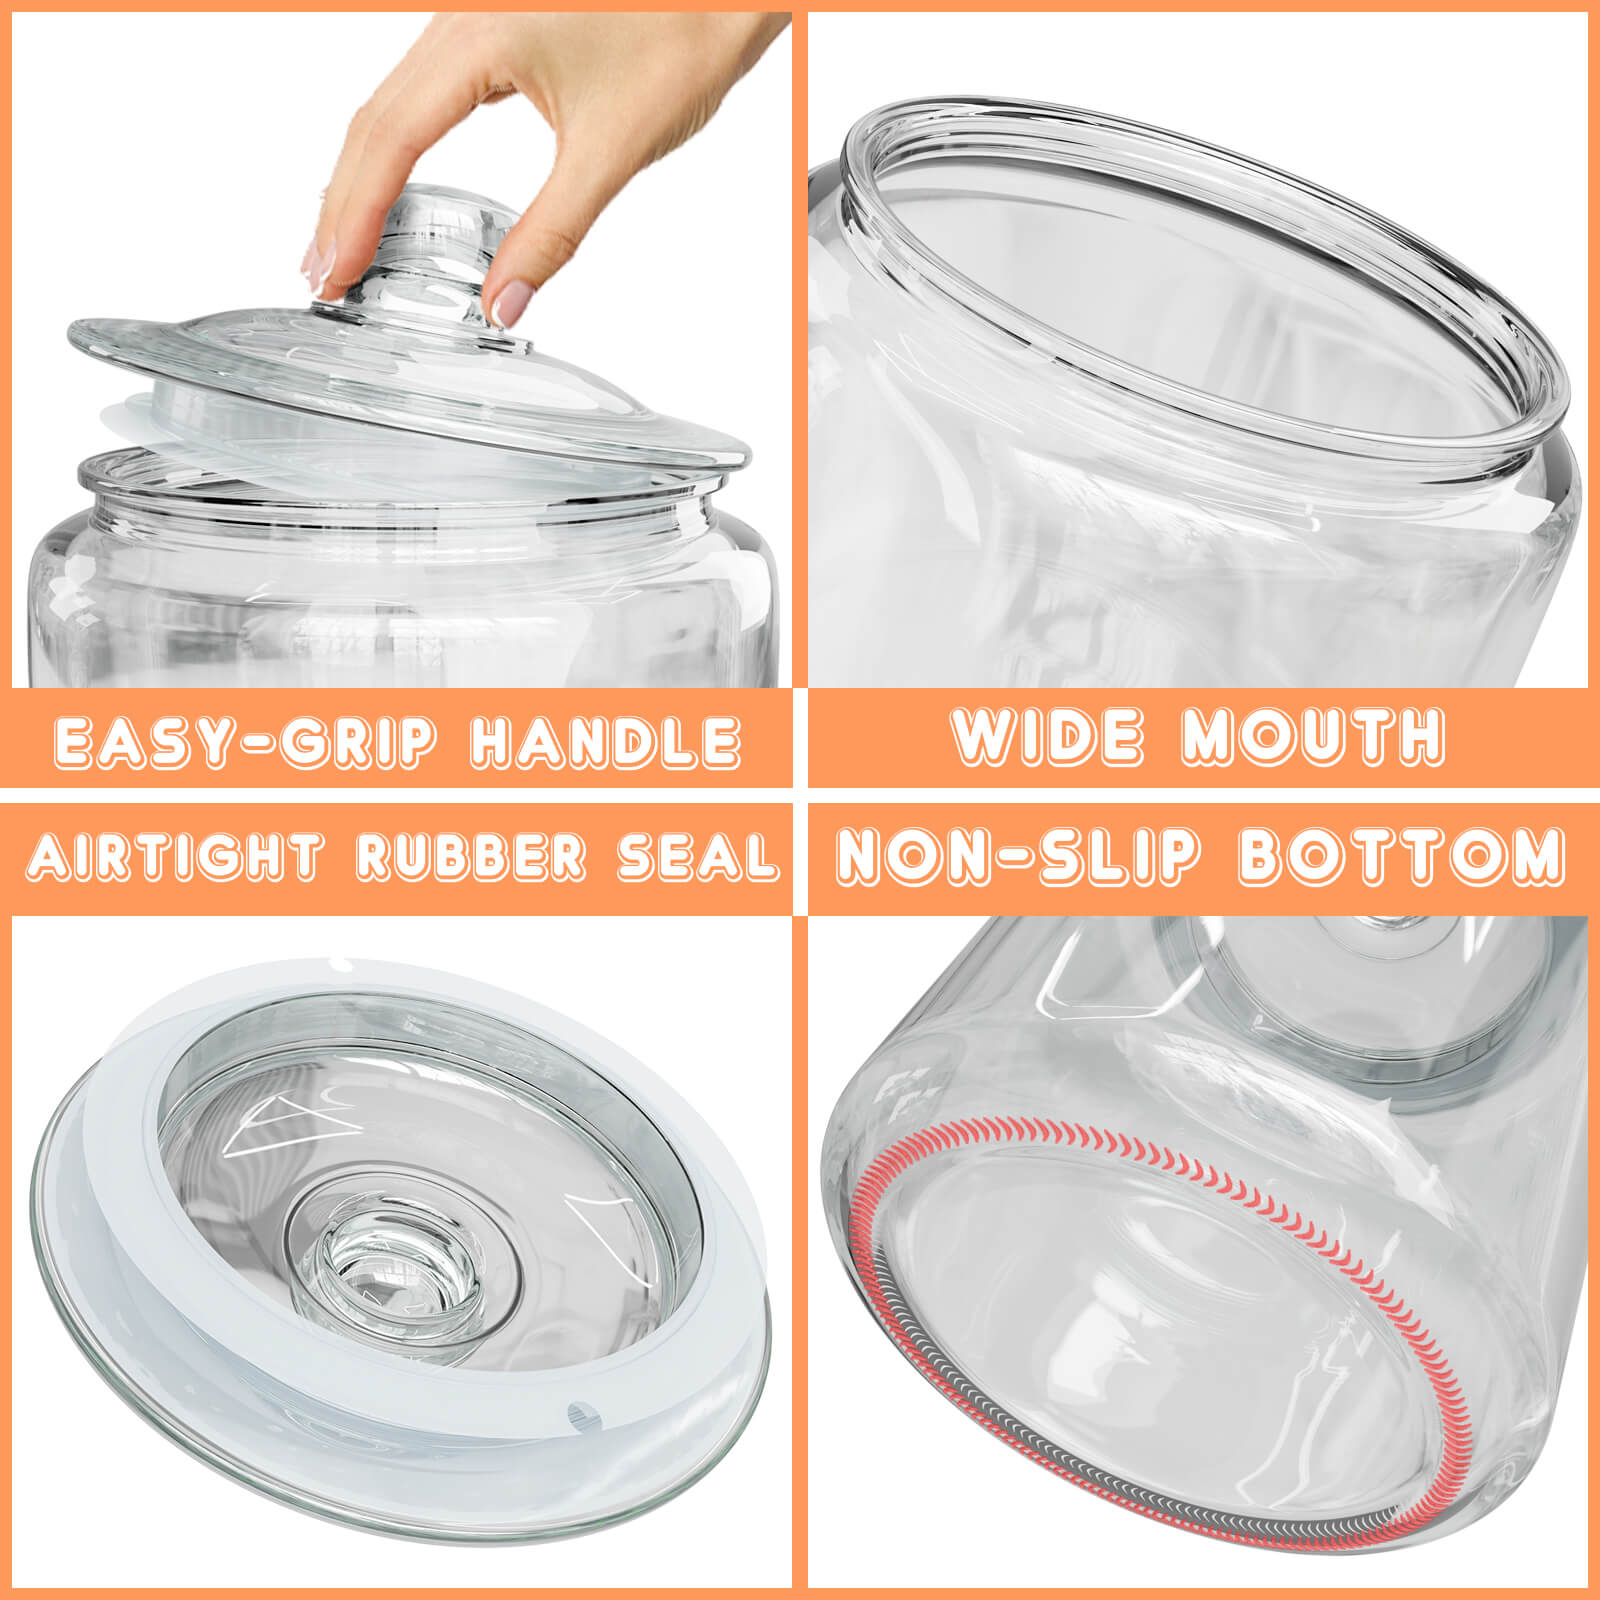 1 Gallon Plastic Clear Buckets with Lids - Divan Packaging